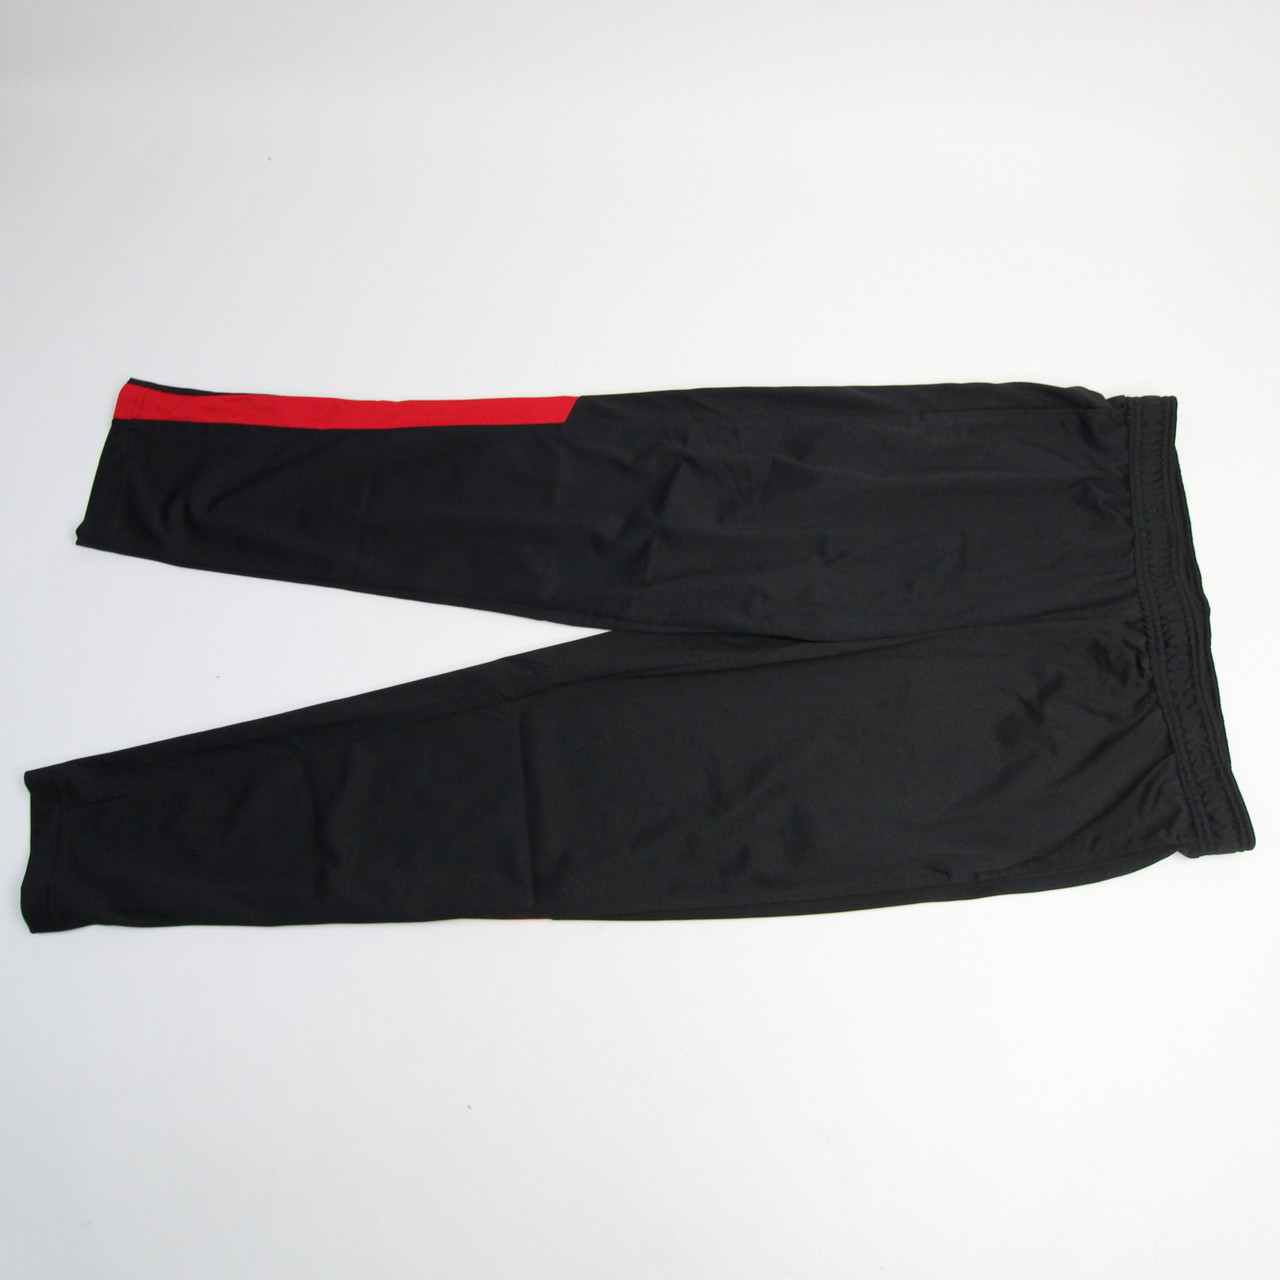 Shop Authentic Team-Issued Athletic Pants from Locker Room Direct